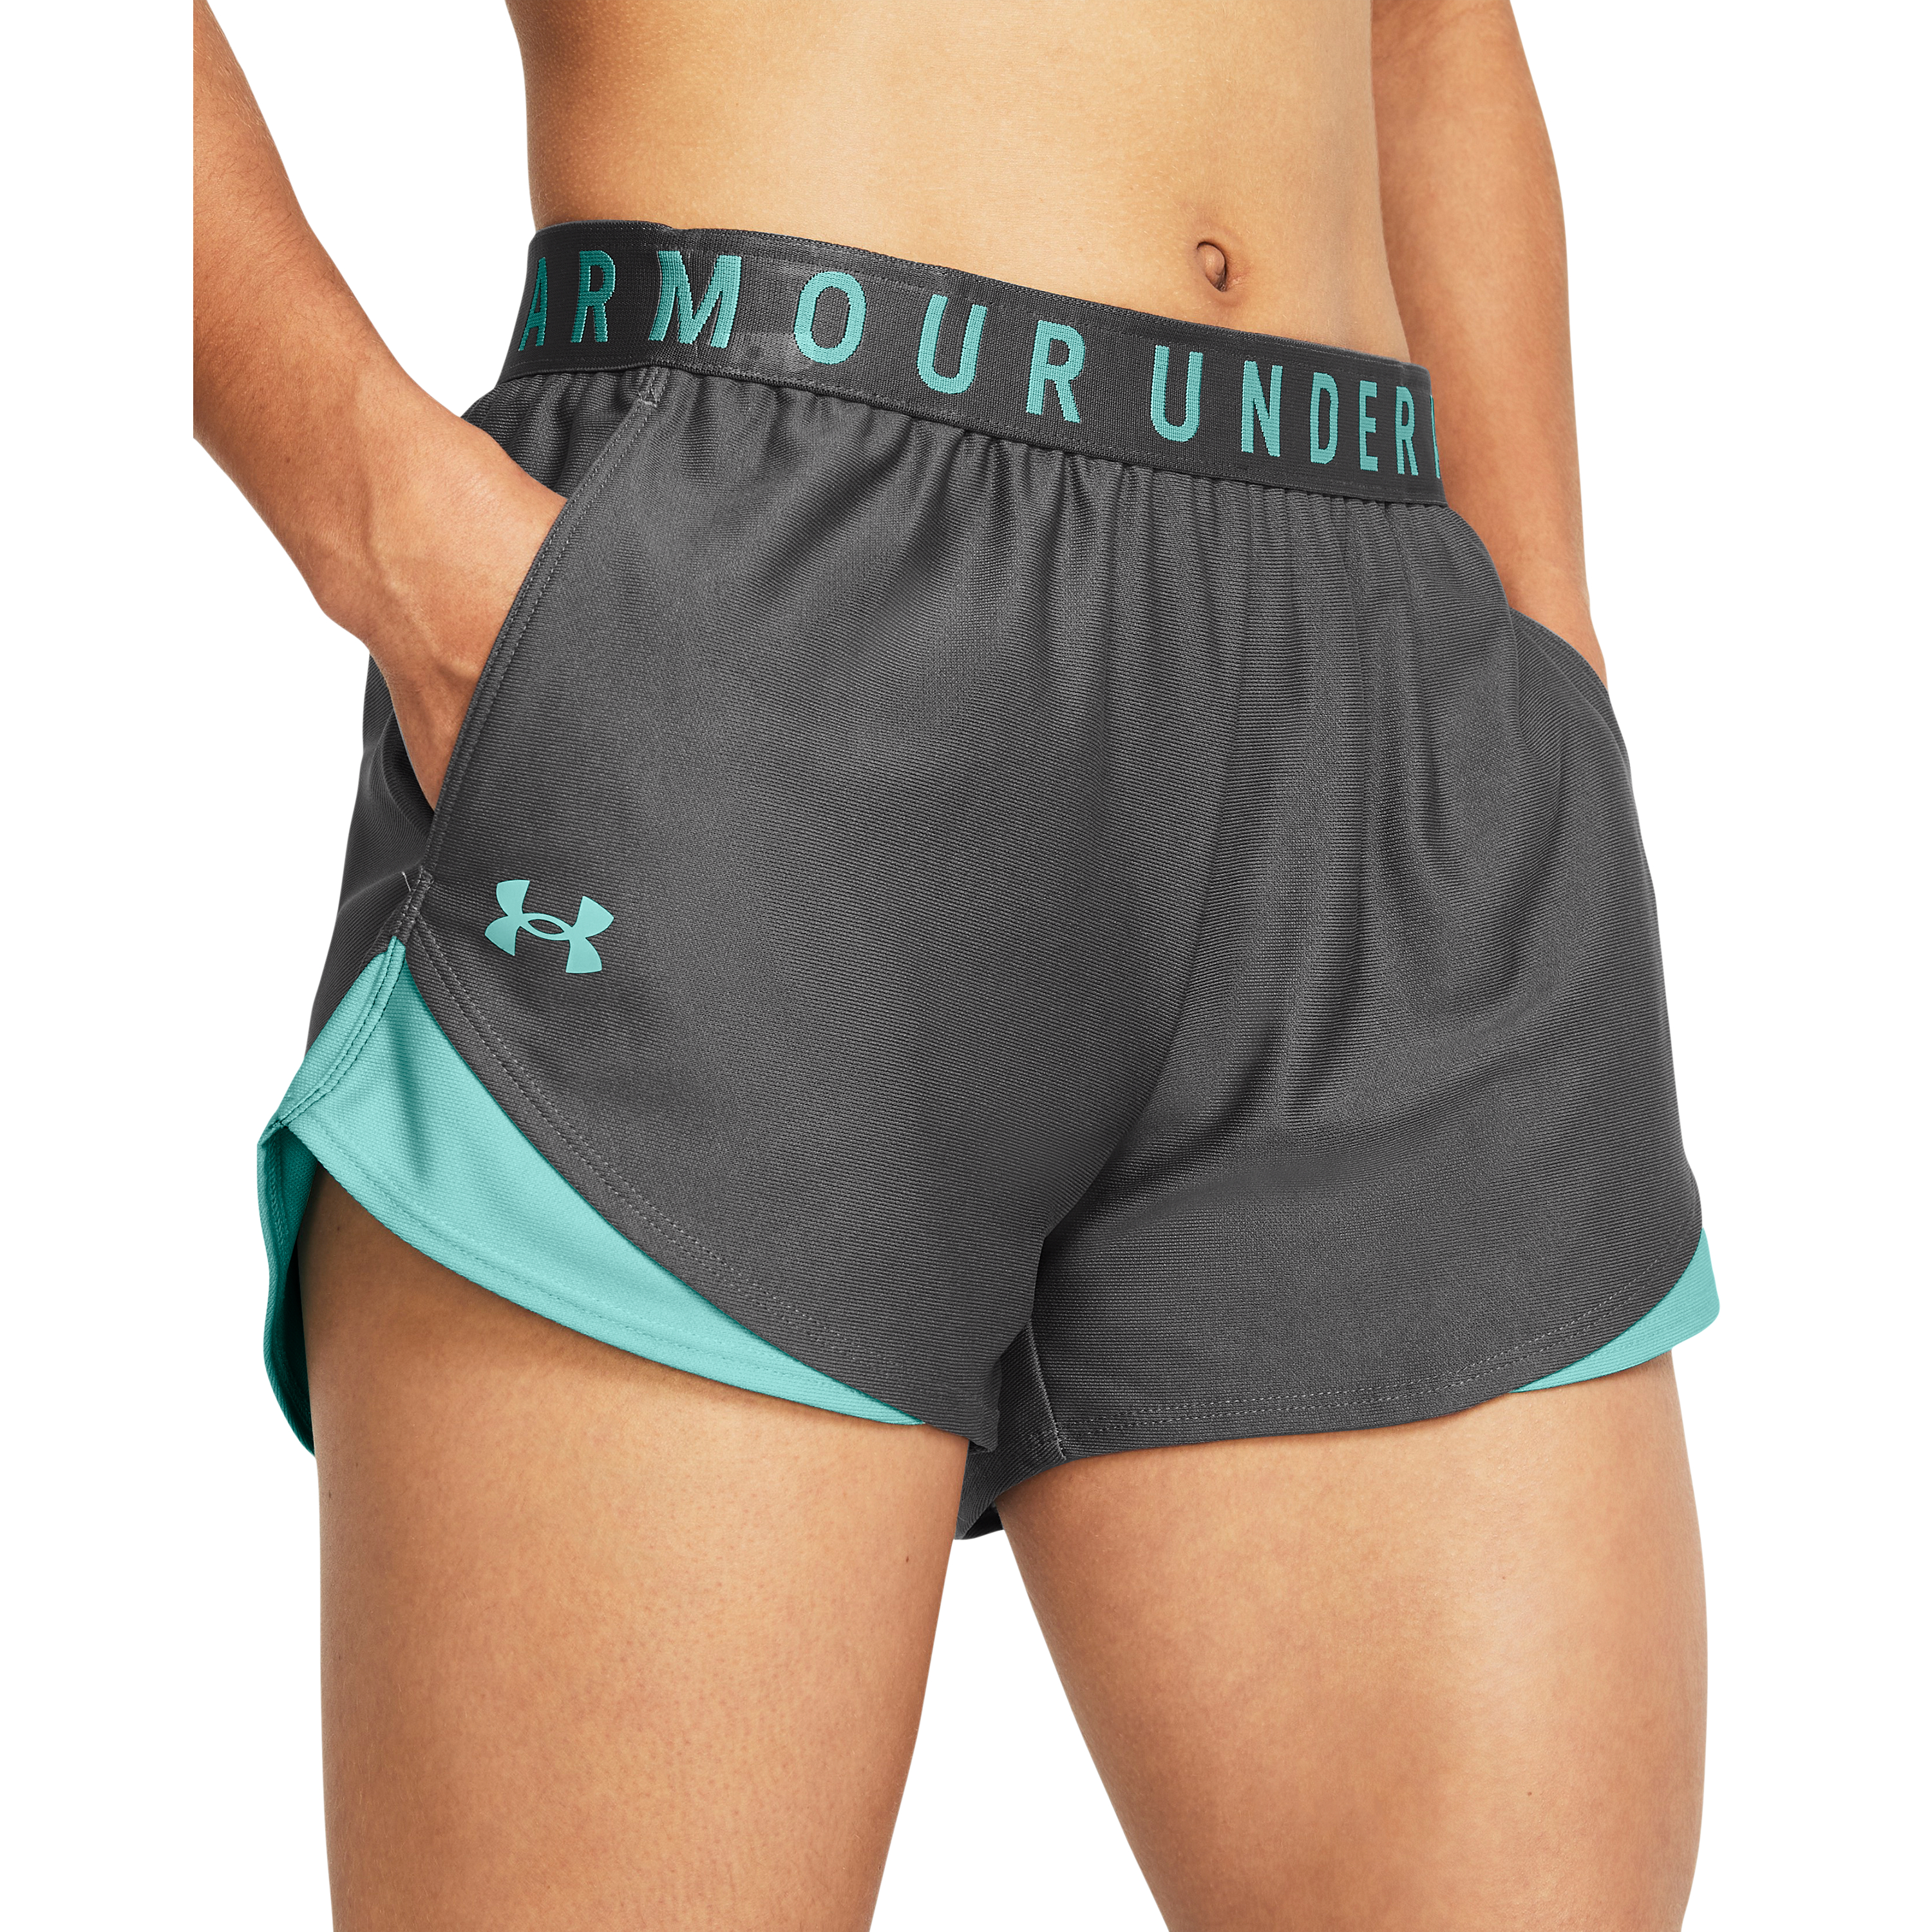 Under Armour Women’s Play Up Shorts 3.0 Castlerock/Radial Turquoise